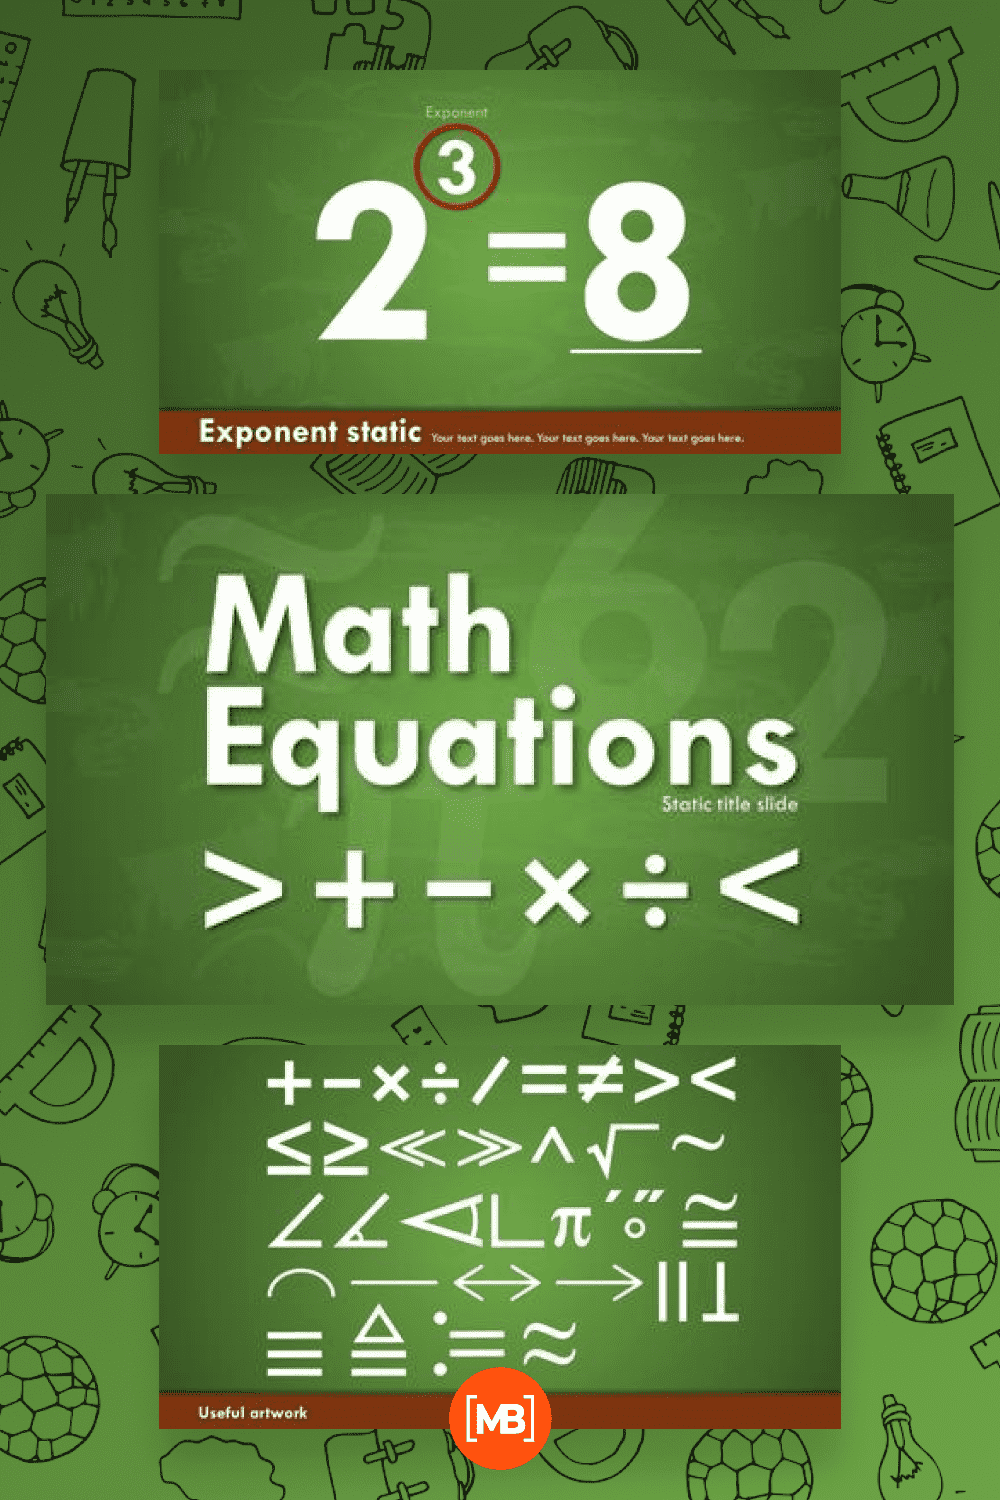 Math equations powerpoint template.